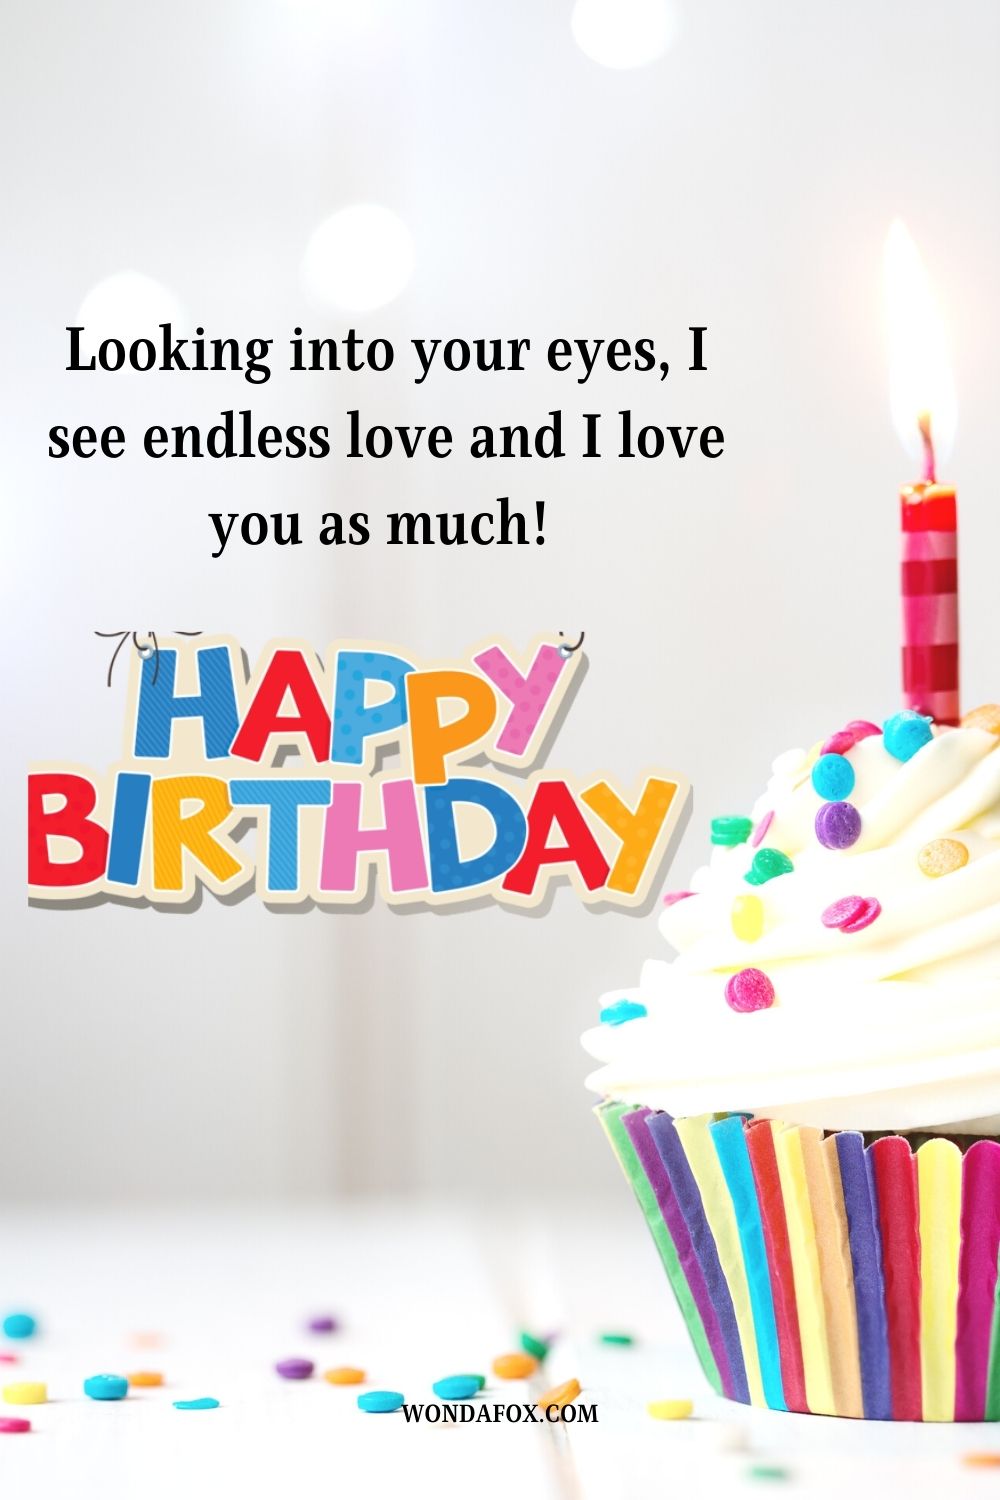 Looking into your eyes, I see endless love and I love you as much! Happy birthday, darling.